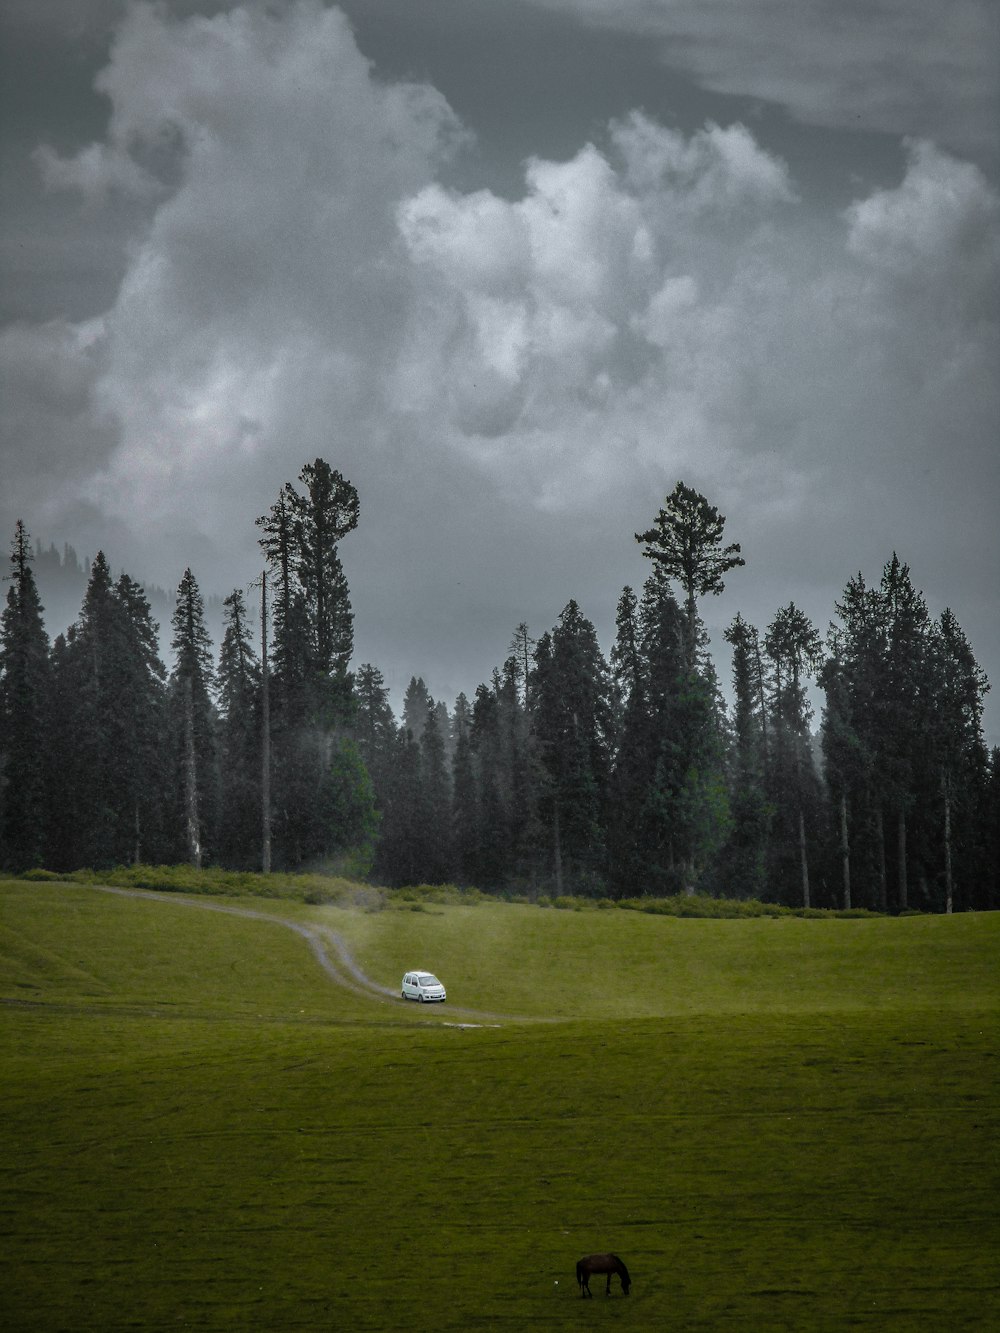 green grass field with trees under gray clouds